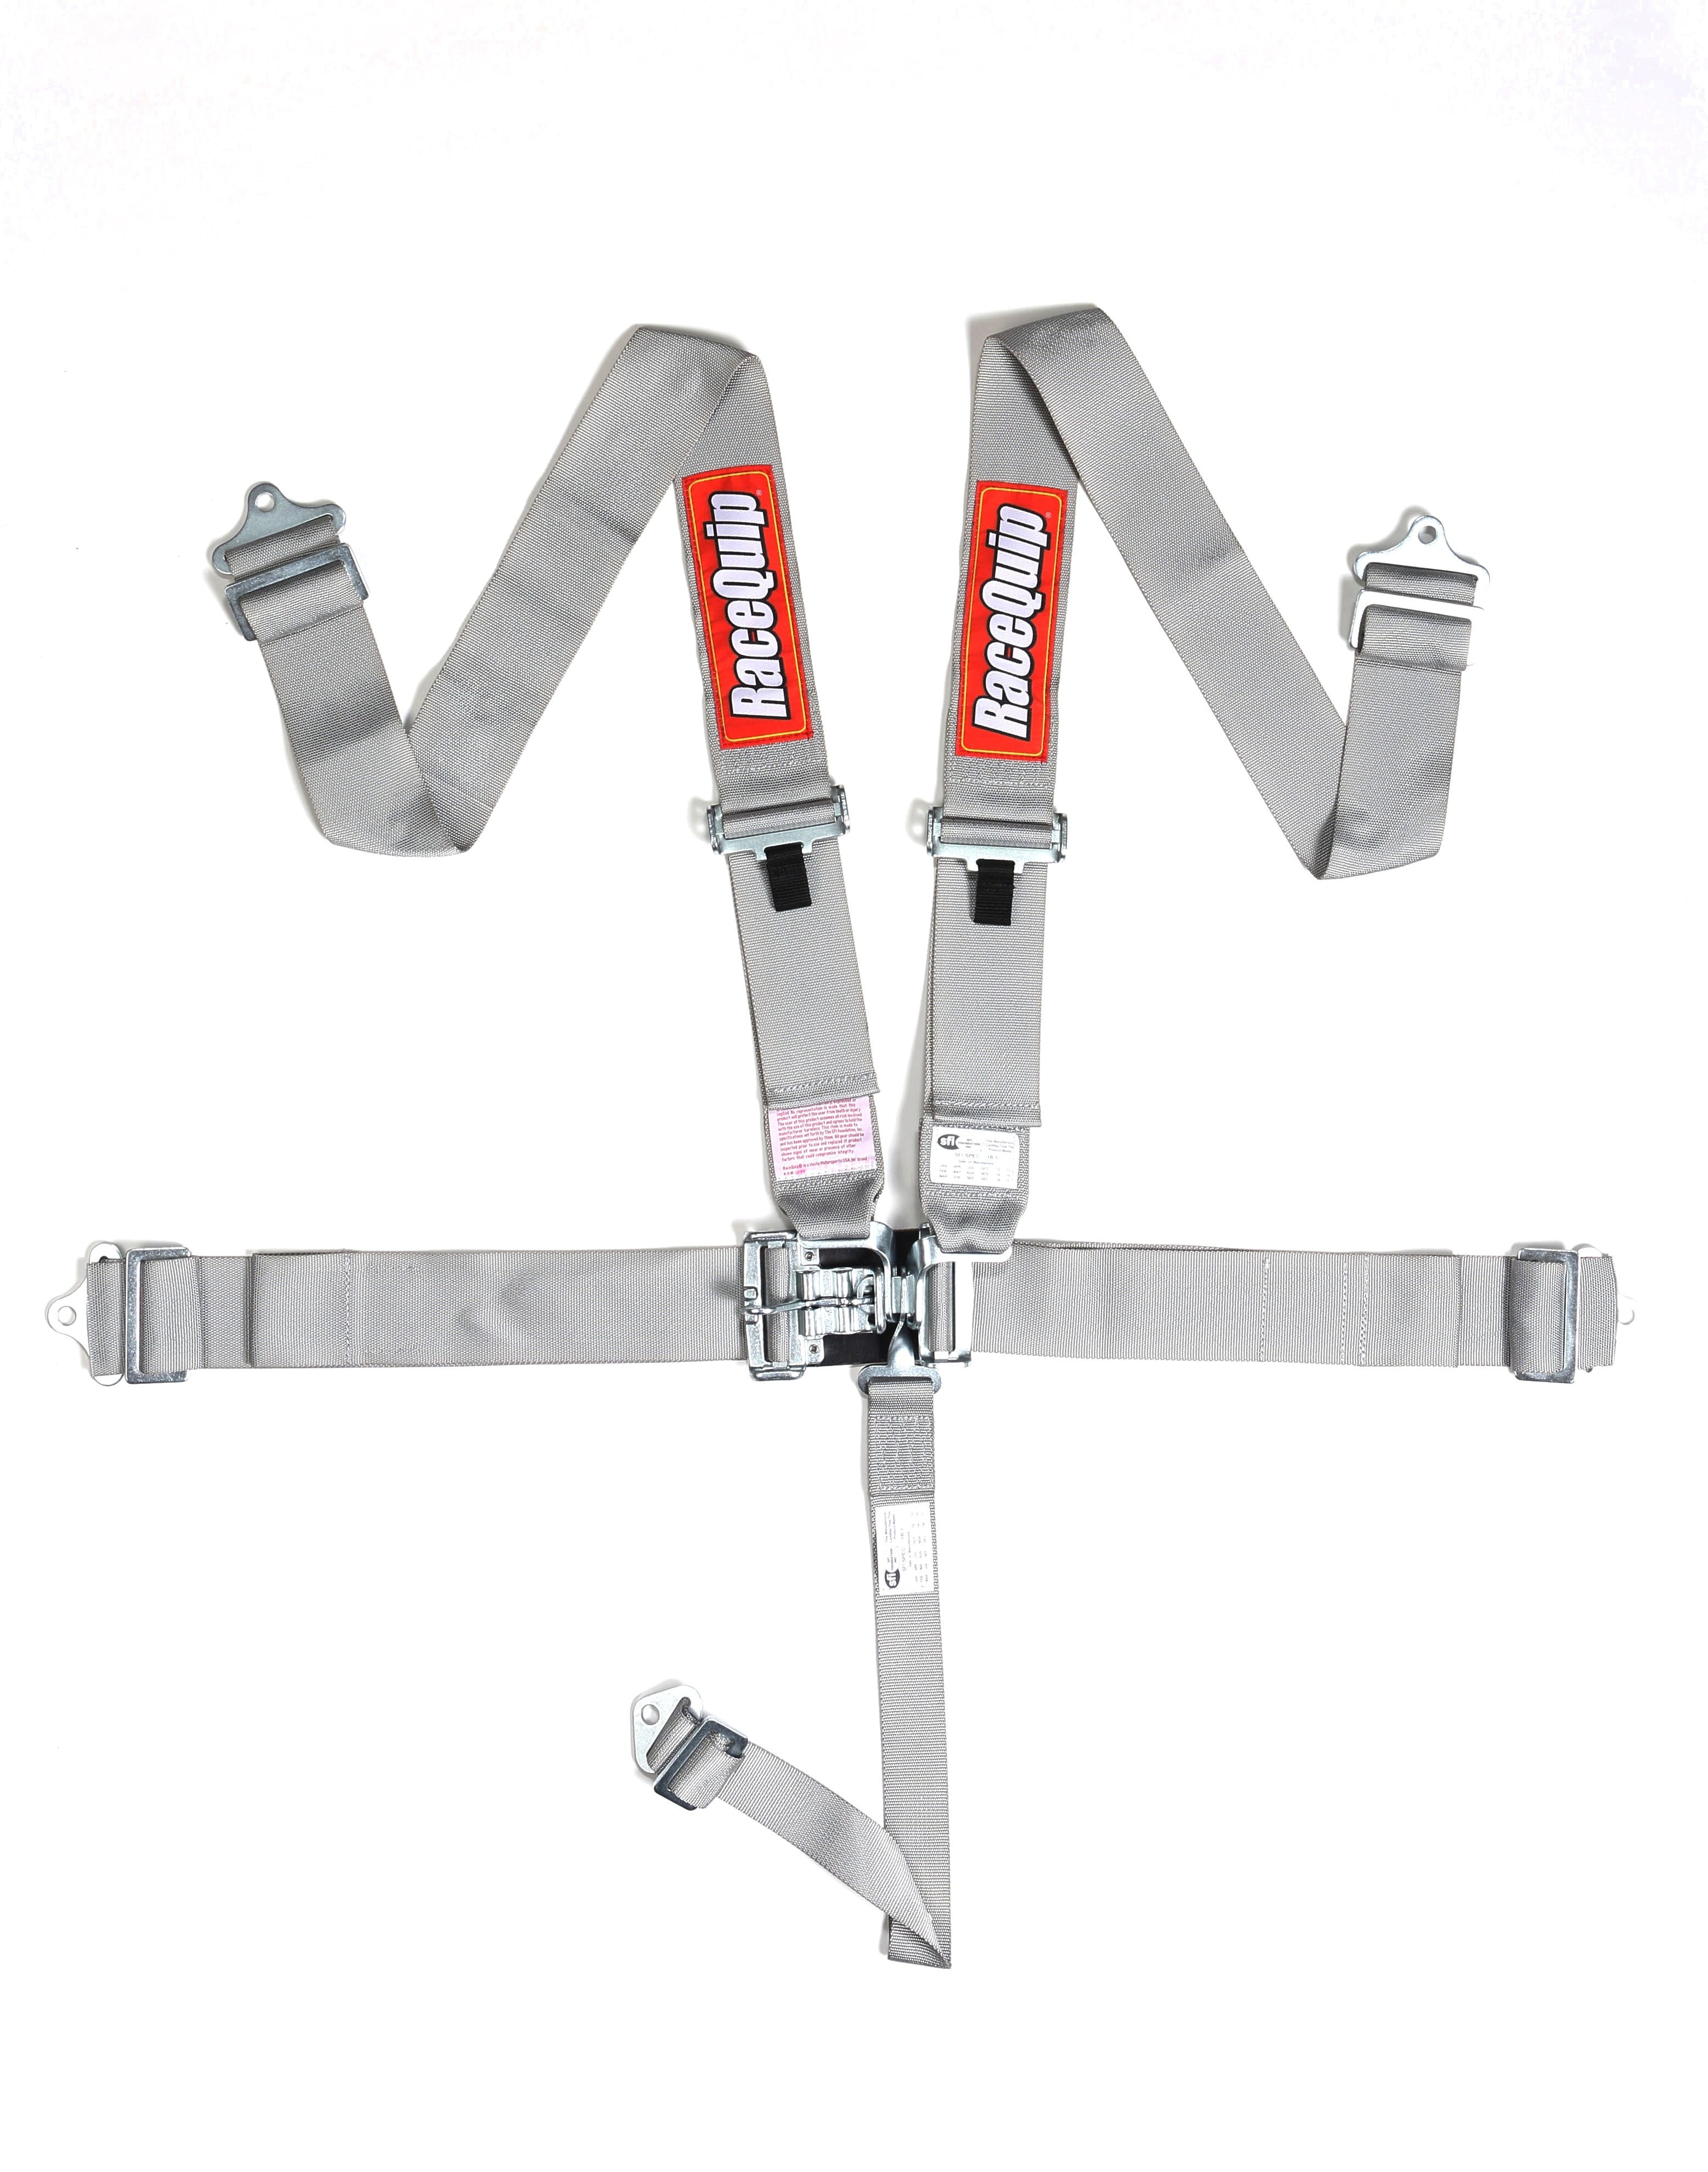 RaceQuip 711061 SFI 16.1 Latch and Link 5-Point Racing Harness Set (Platinum)